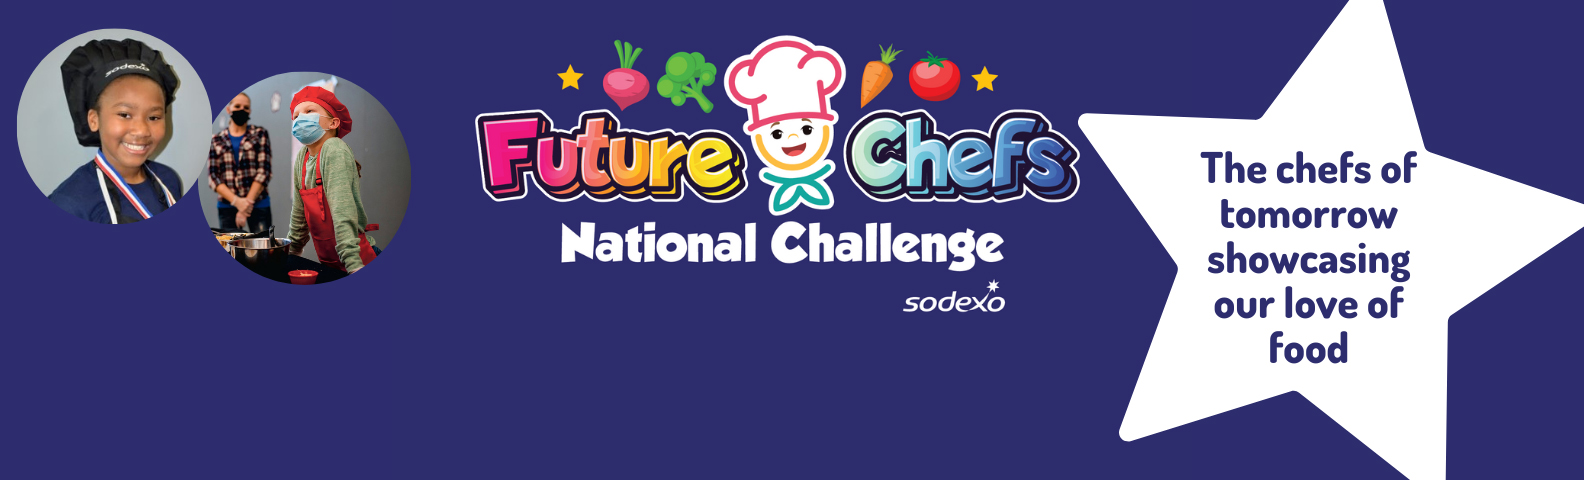 Future Chefs National Challenge -The chefs of tomorrow showcasing our love of food